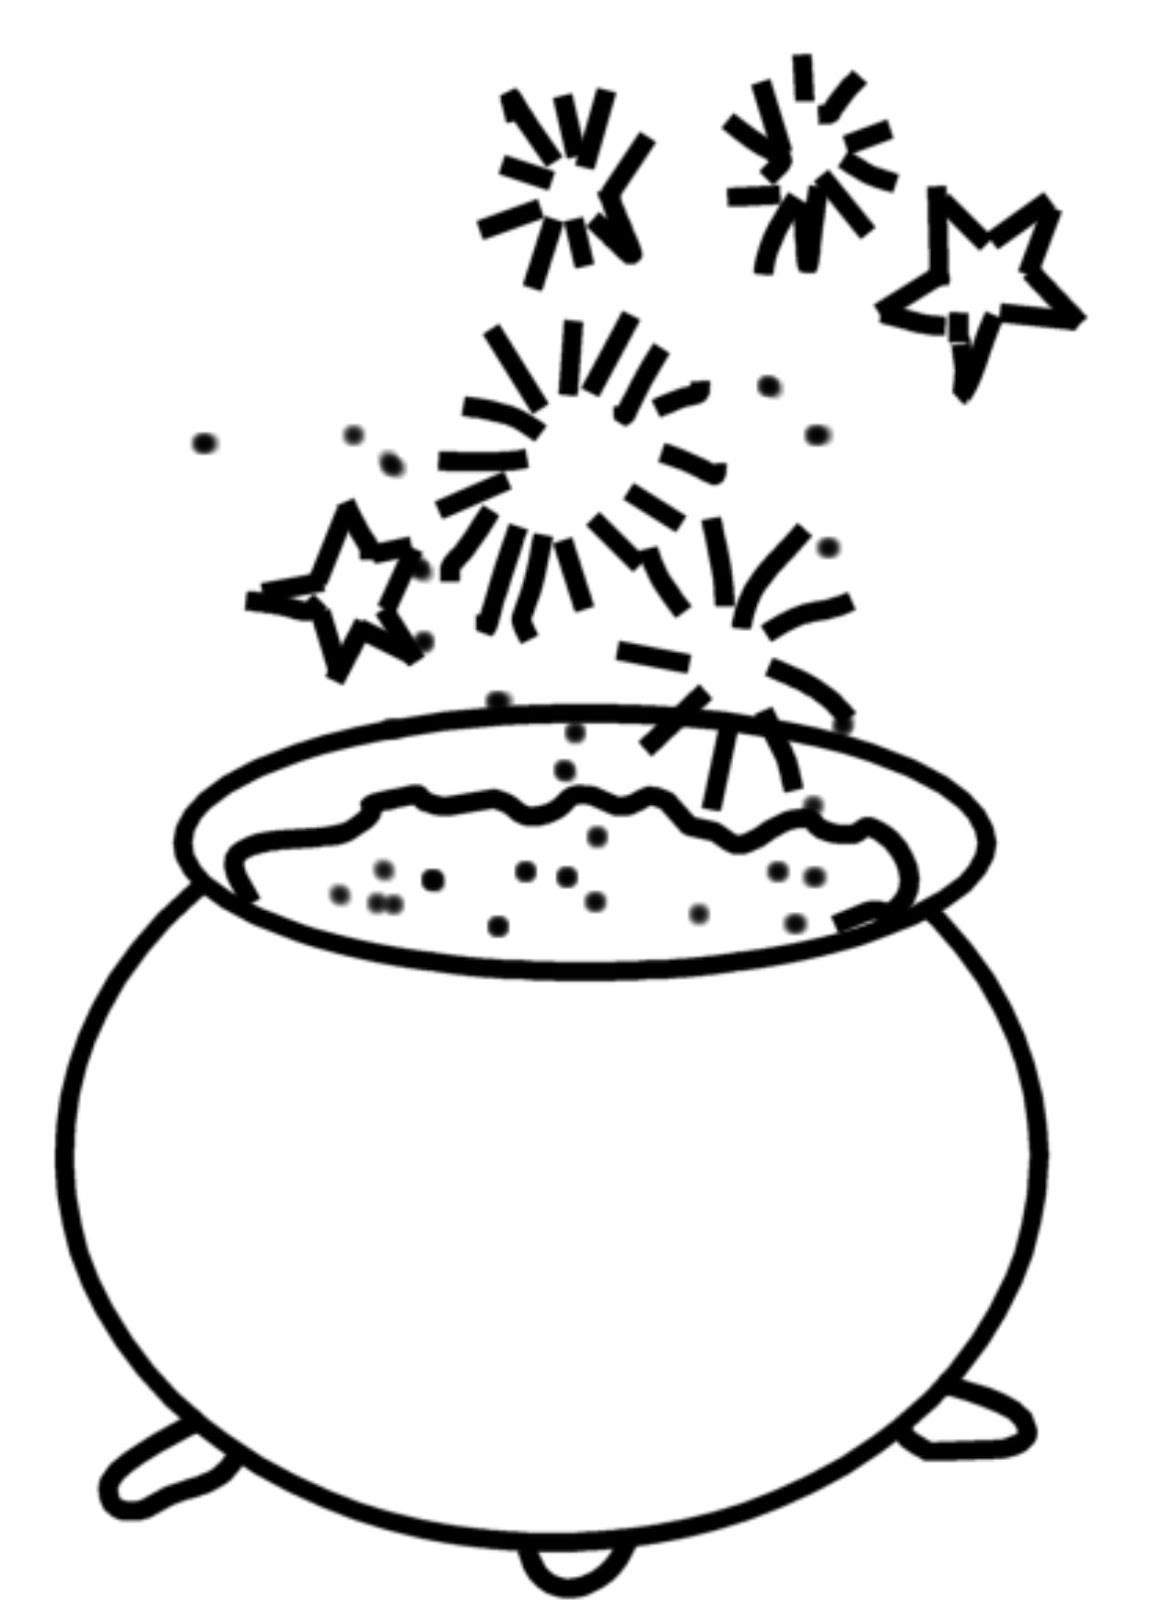 cauldron-drawing-free-download-on-clipartmag